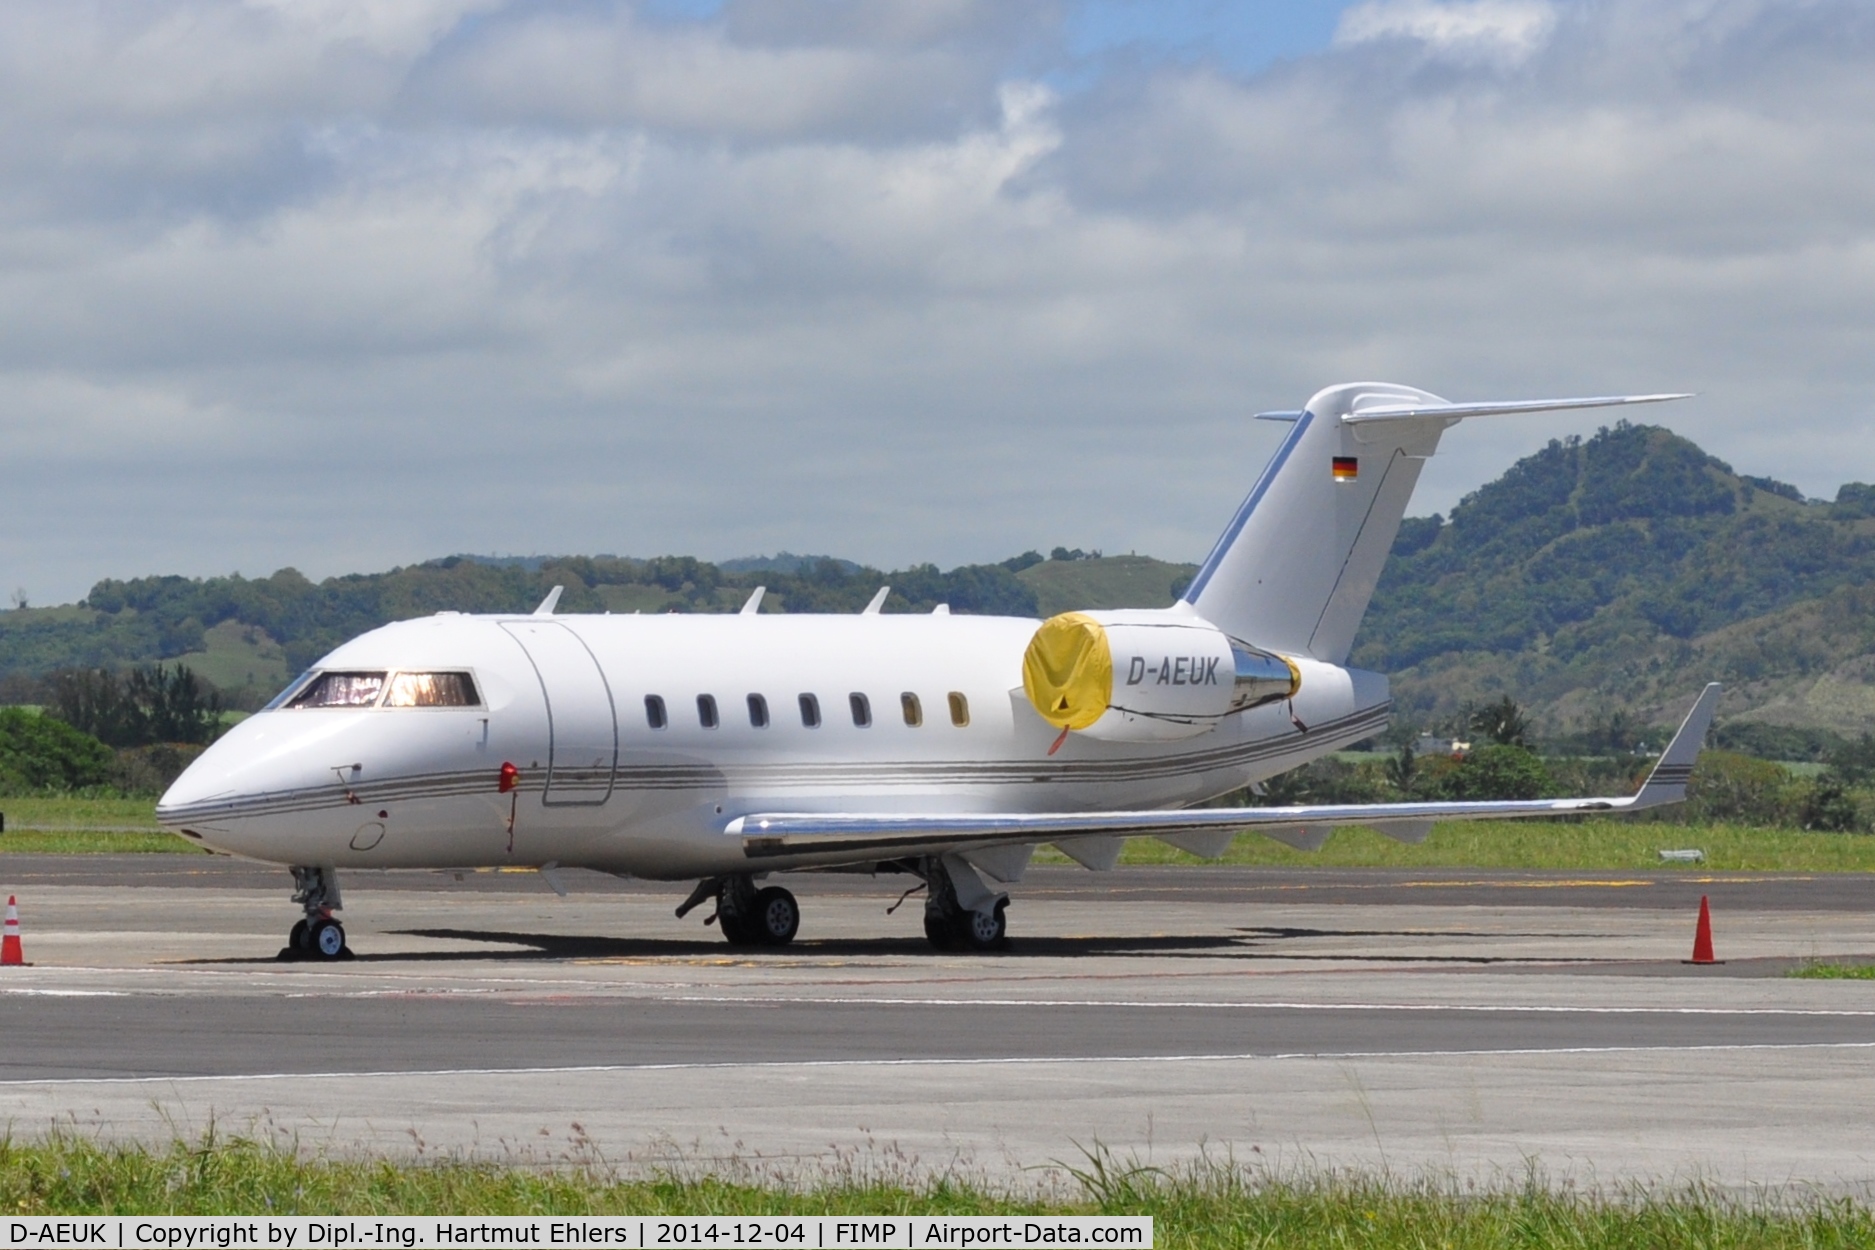 D-AEUK, 2004 Bombardier Challenger 604 (CL-600-2B16) C/N 5580, Seen on 05 Dec 2014 at MRU/FIMP from the premises of the Maritime Air Squadron, National Coast Guard, Mauritius.